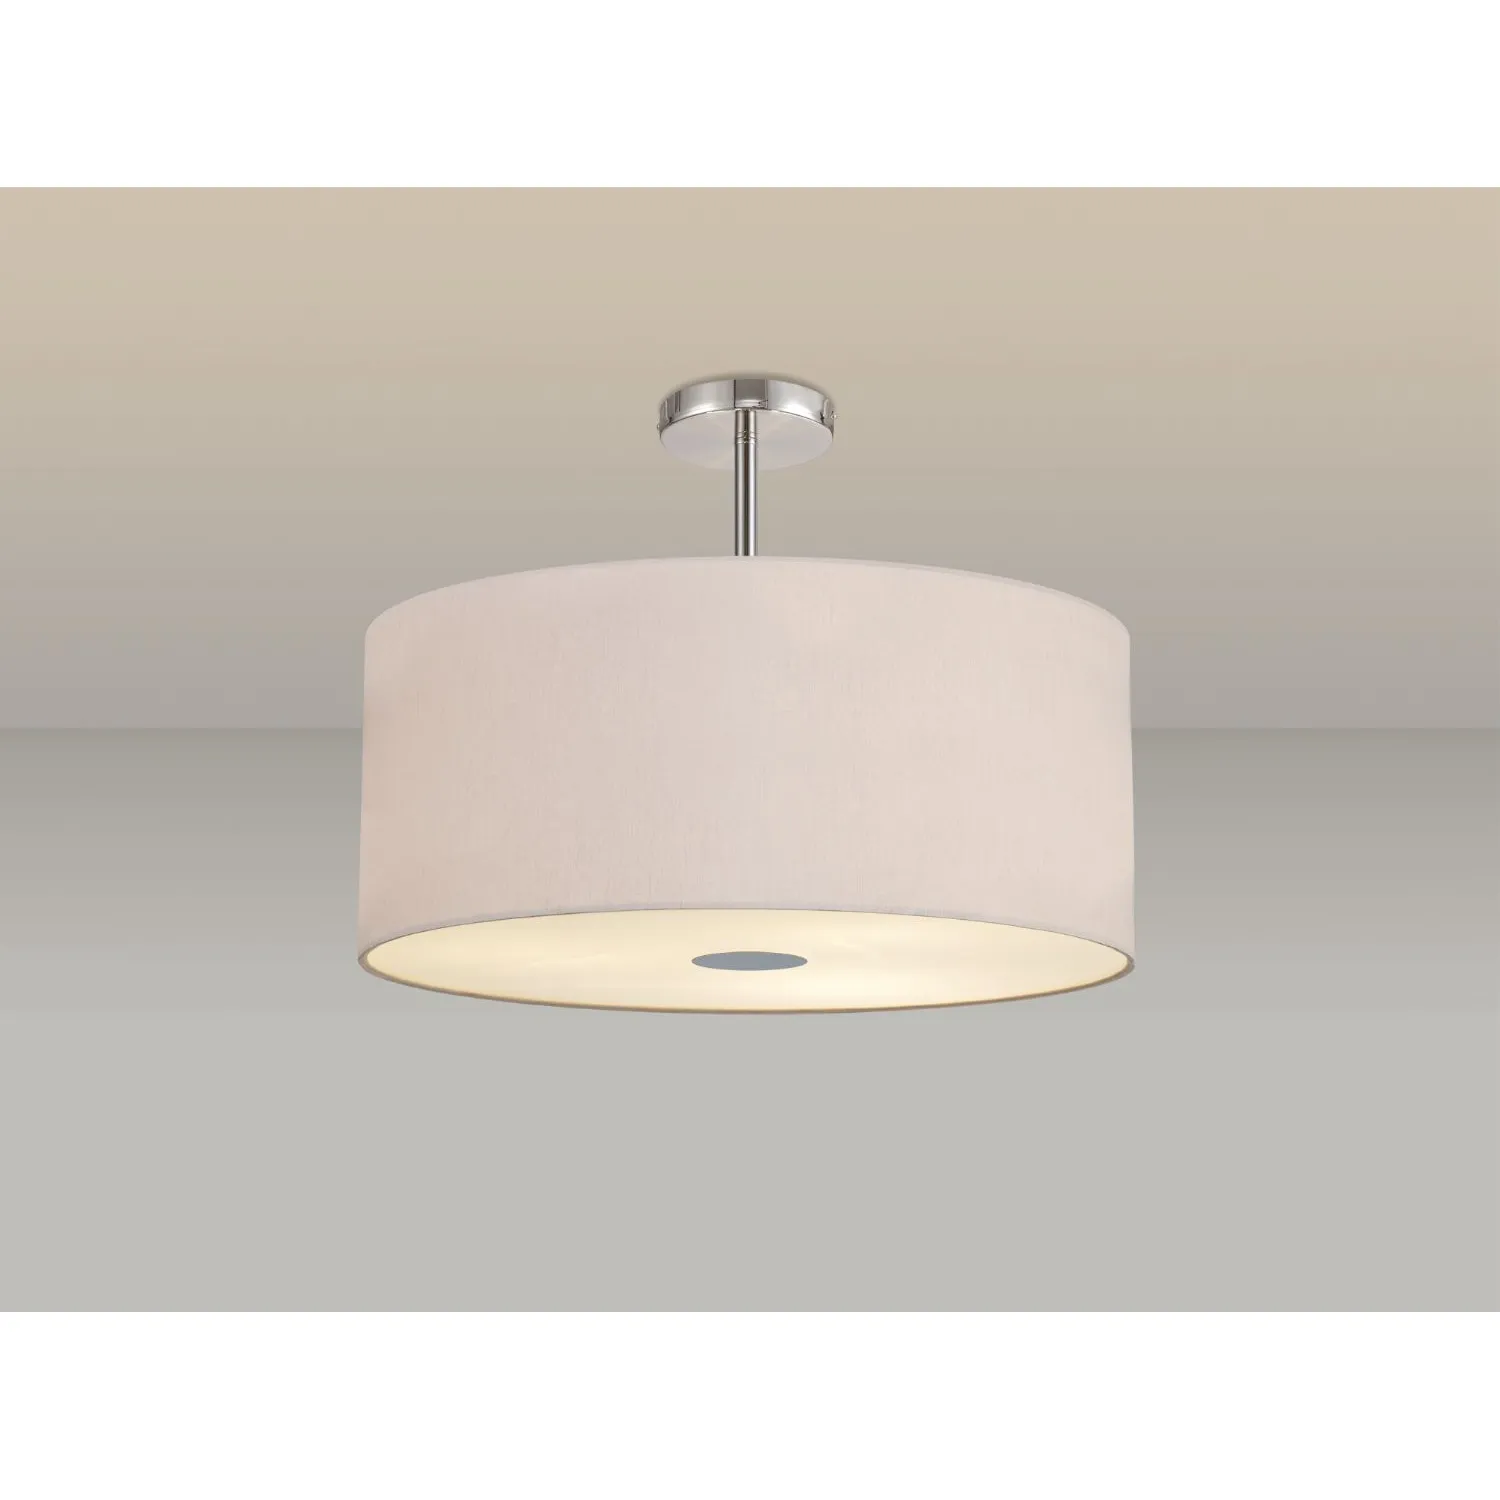 Baymont Polished Chrome 5 Light E27 Semi Flush Fixture c w 600 Dual Faux Silk Fabric Shade, Nude Beige Moonlight And 600mm Frosted PC Acrylic Diffuser